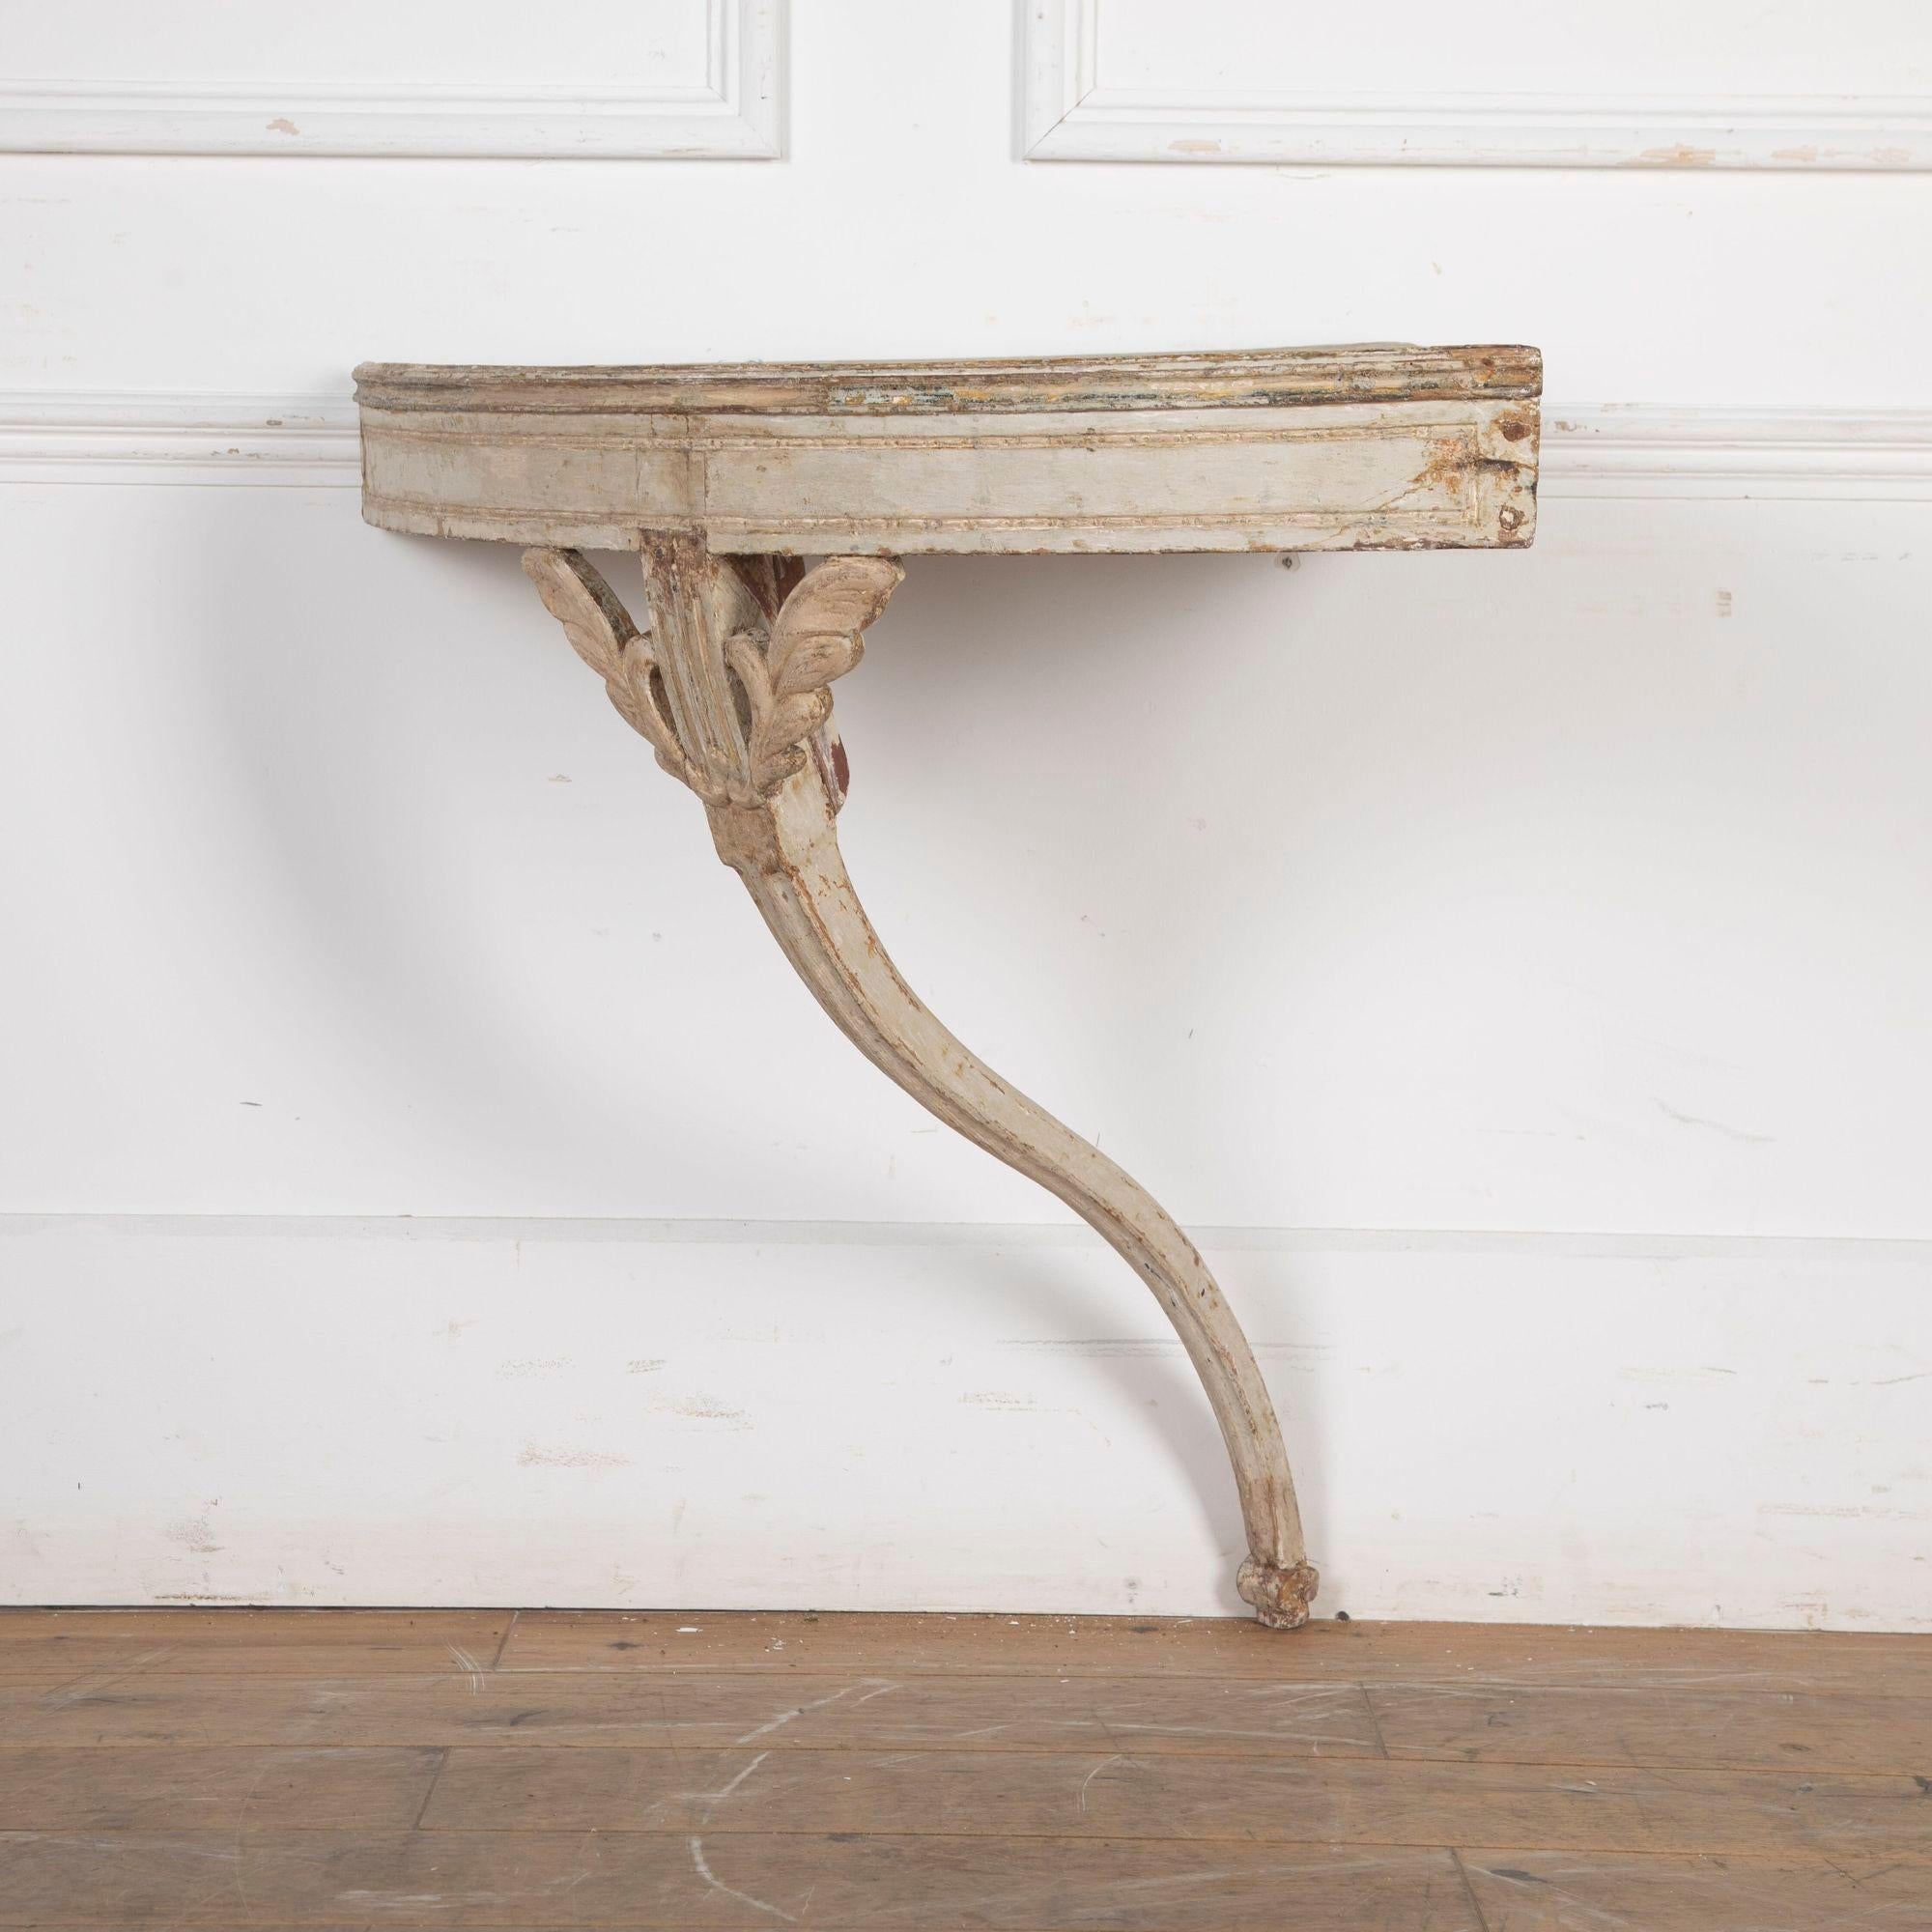 18th Century Gustavian transition corner table.
Beautifully carved and dry scraped to original paint with its old reinforcement on the back of the leg.
Circa 1780.